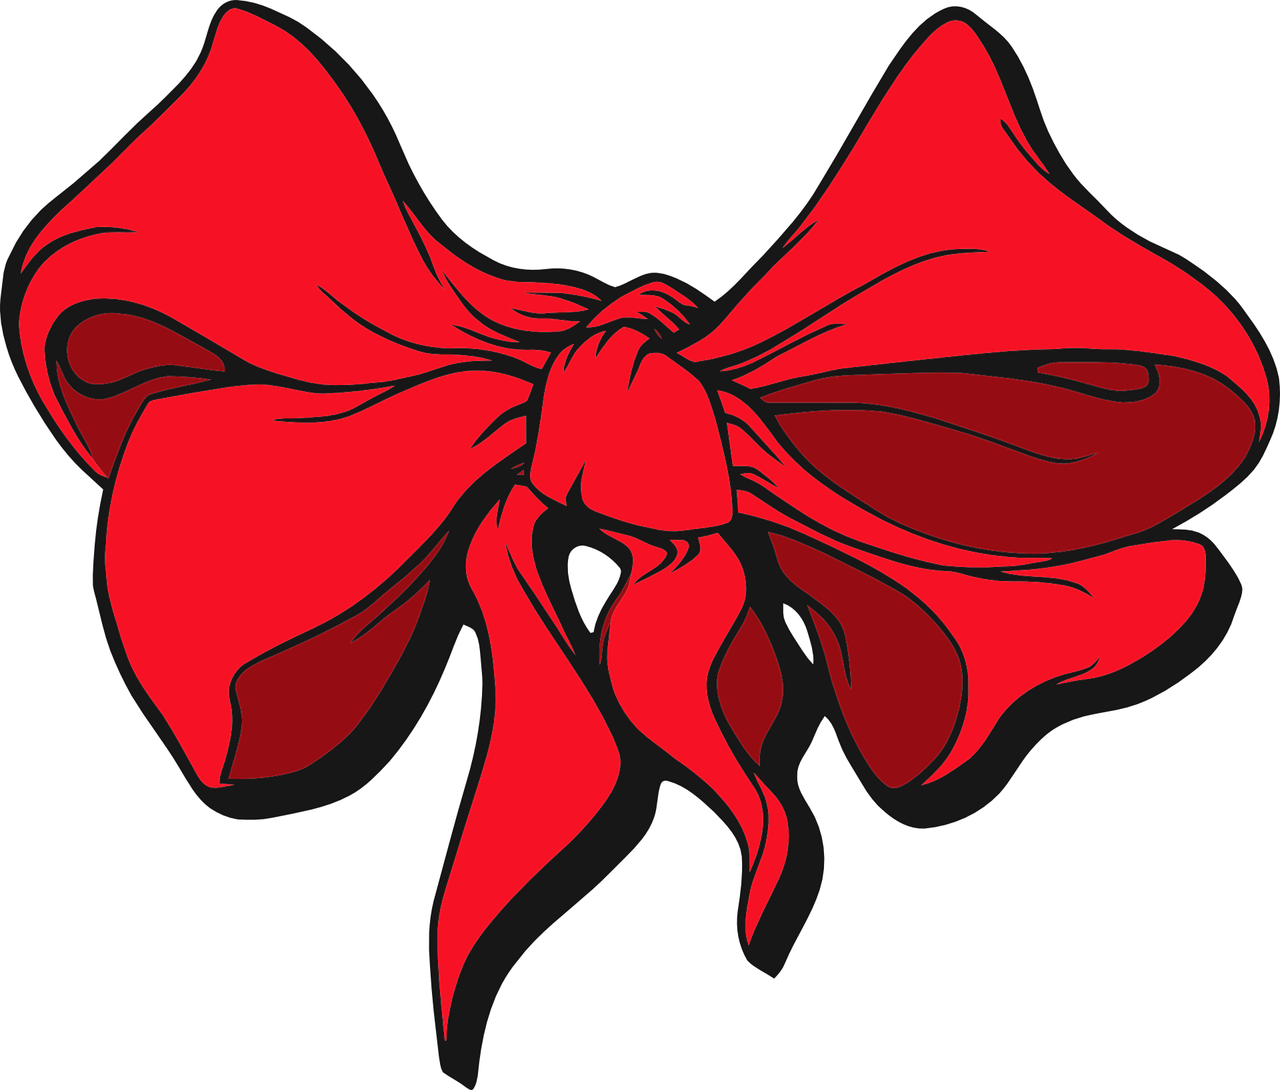 Red Bow Illustration.png PNG